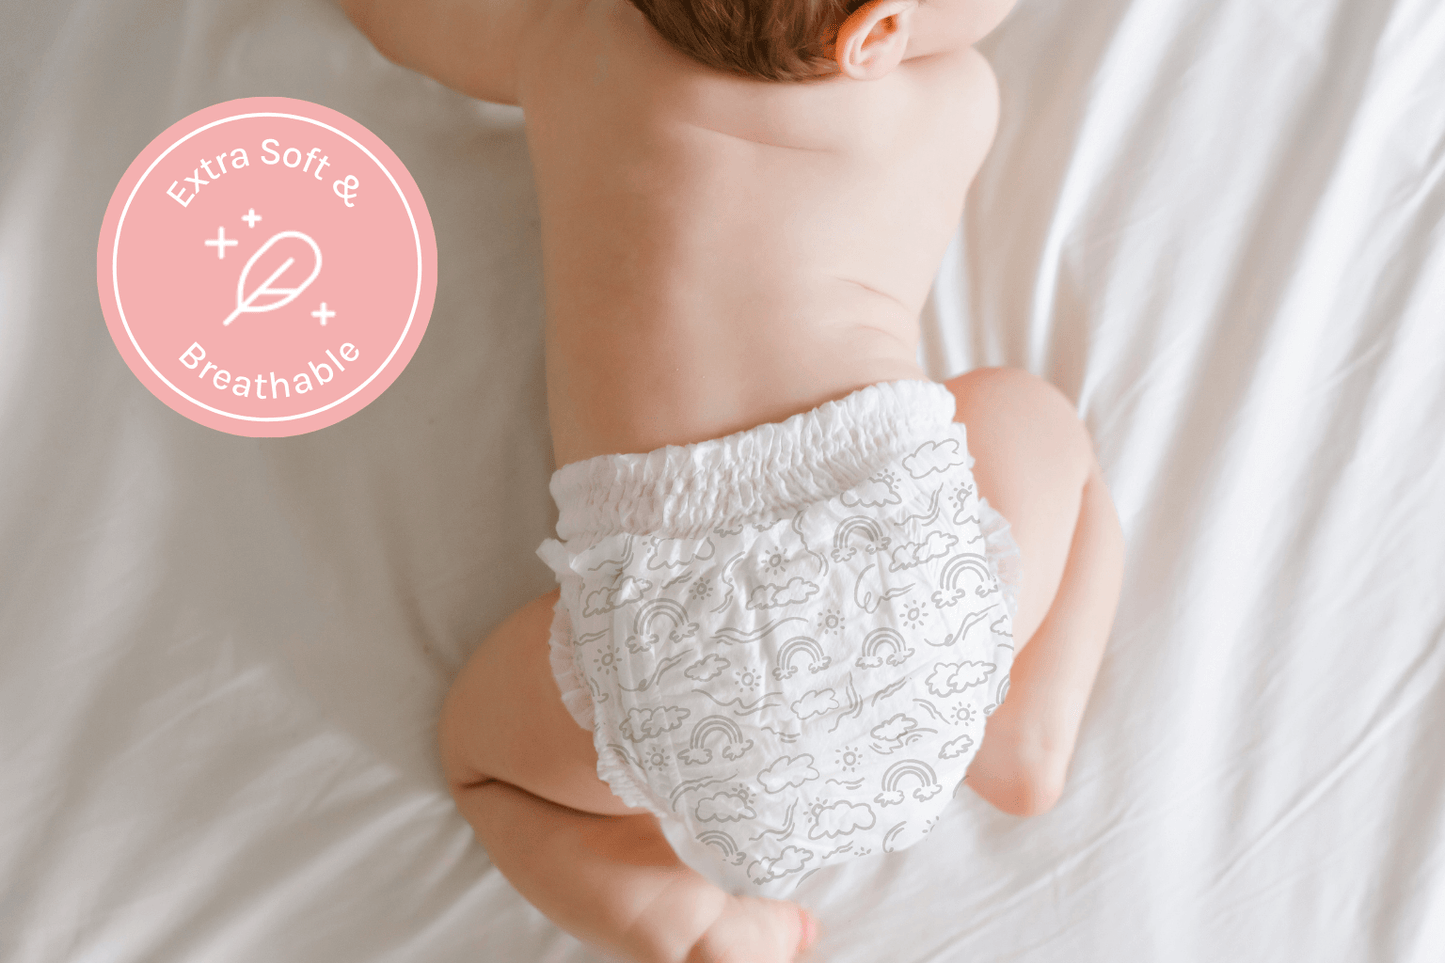 Our Ultra Absorbent, Extra Soft Diaper (Subscribe)